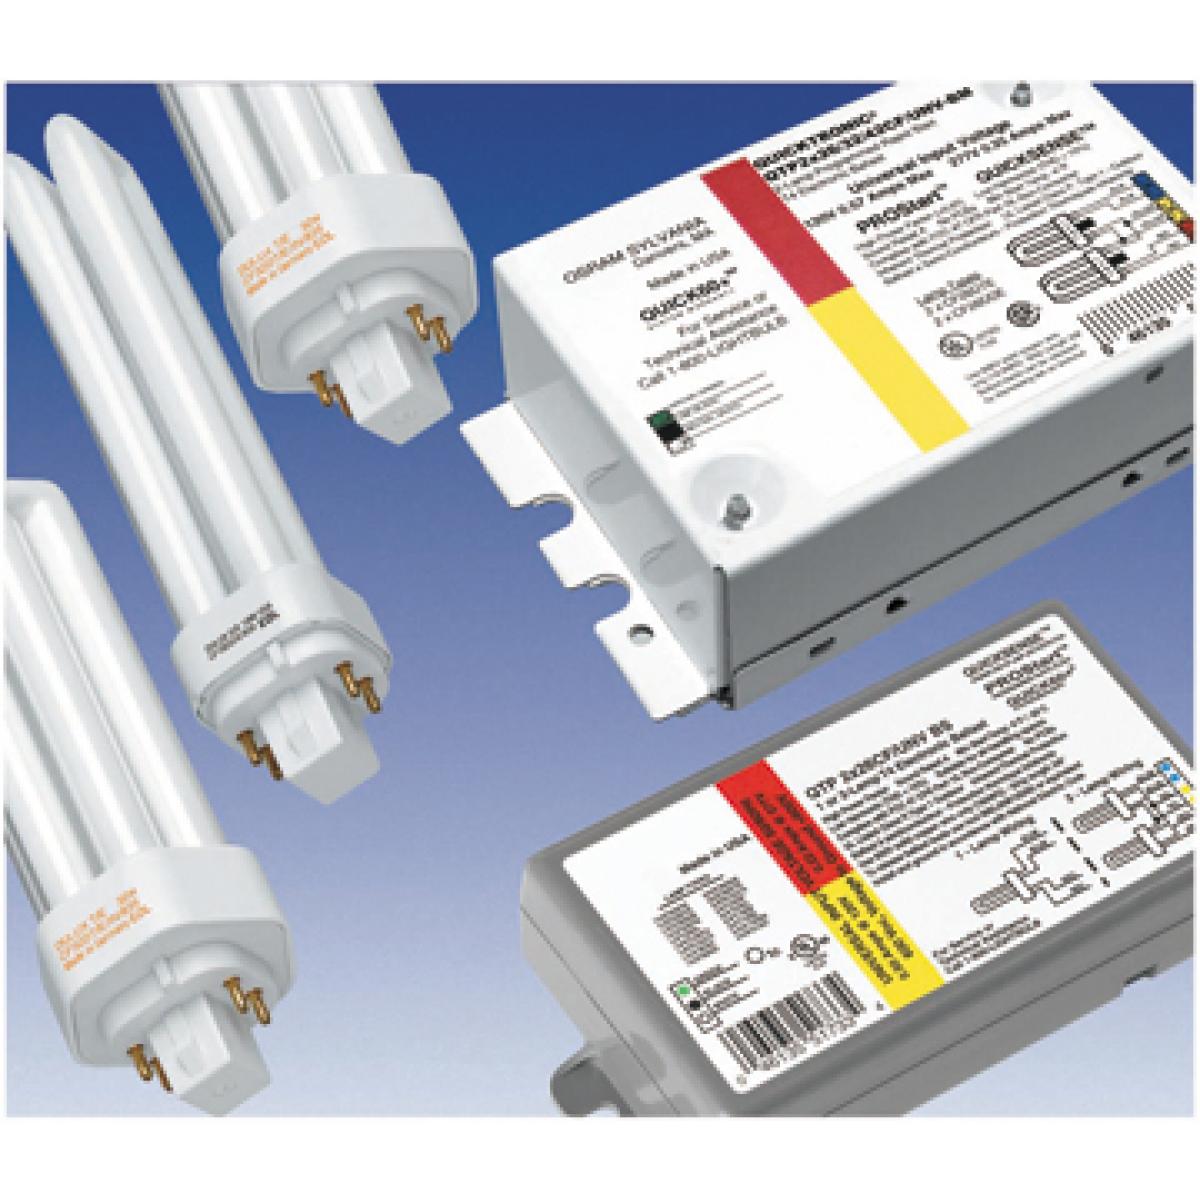 Satco S5229 QTP1/2X26CF/UNV/Dual Entry # of lamps: 1-2 CF26 Compact Fluorescent Programmed Start, < 10% THD, Universal Voltage Ballast